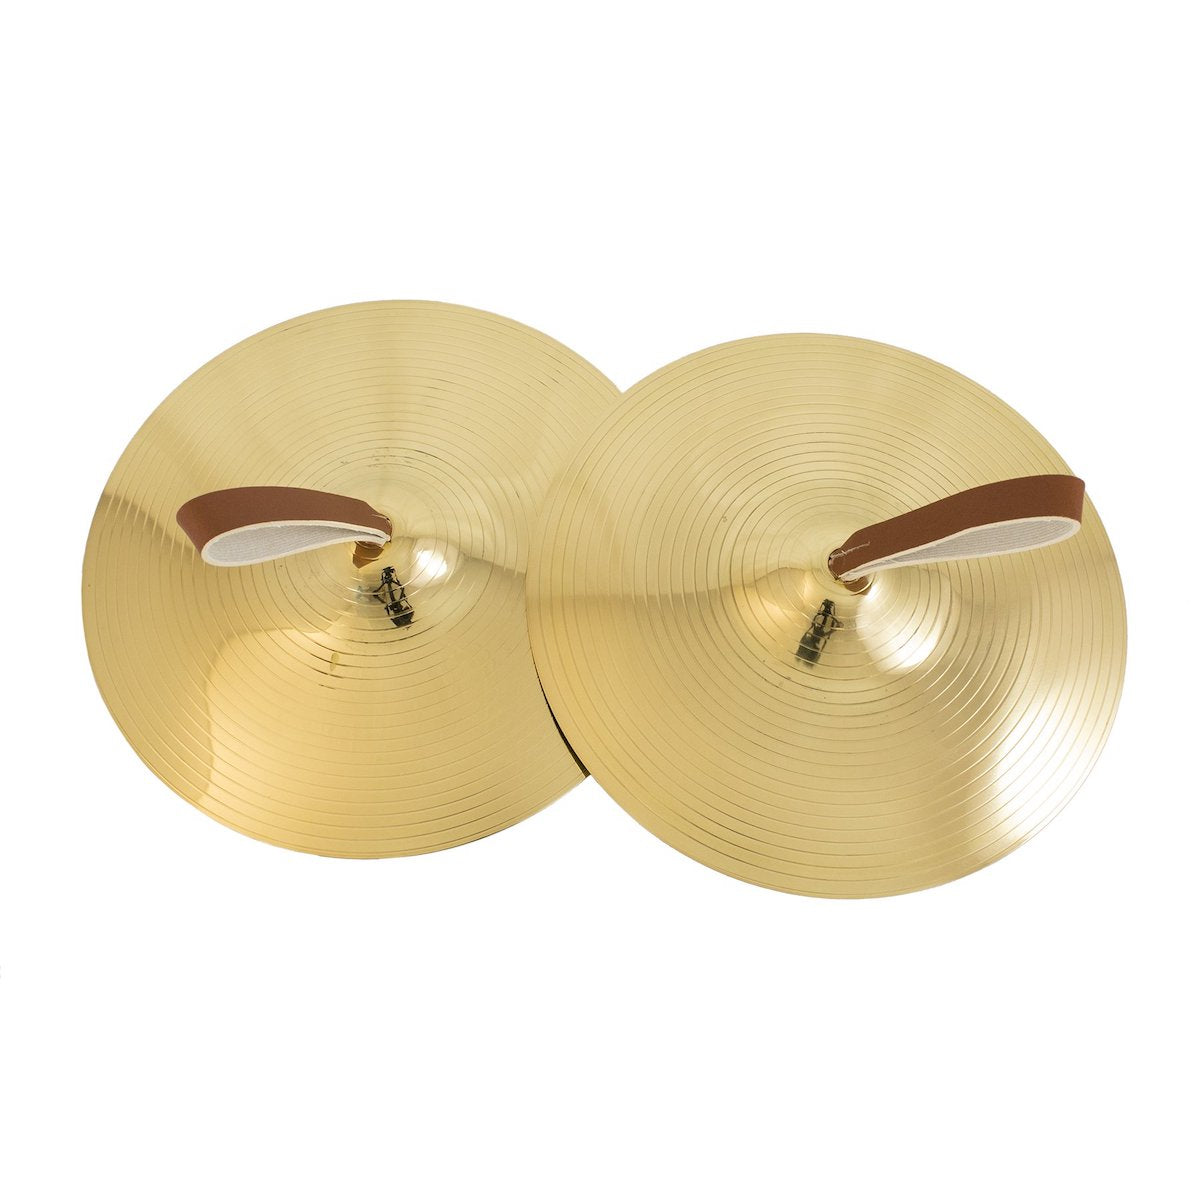 Percussion Plus Pair of Cymbals (various sizes)